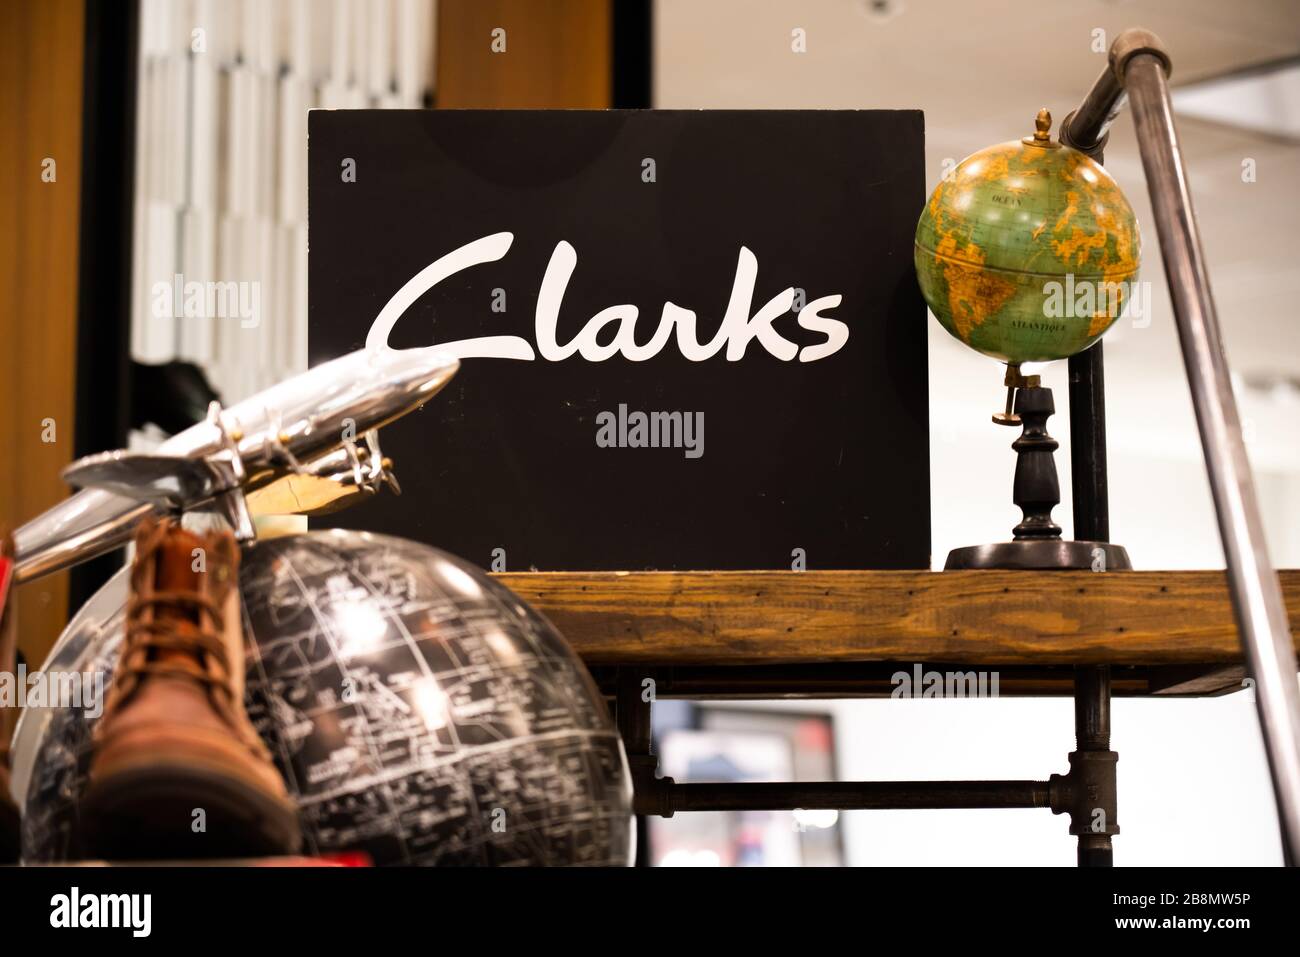 clarks shoes macy's new york